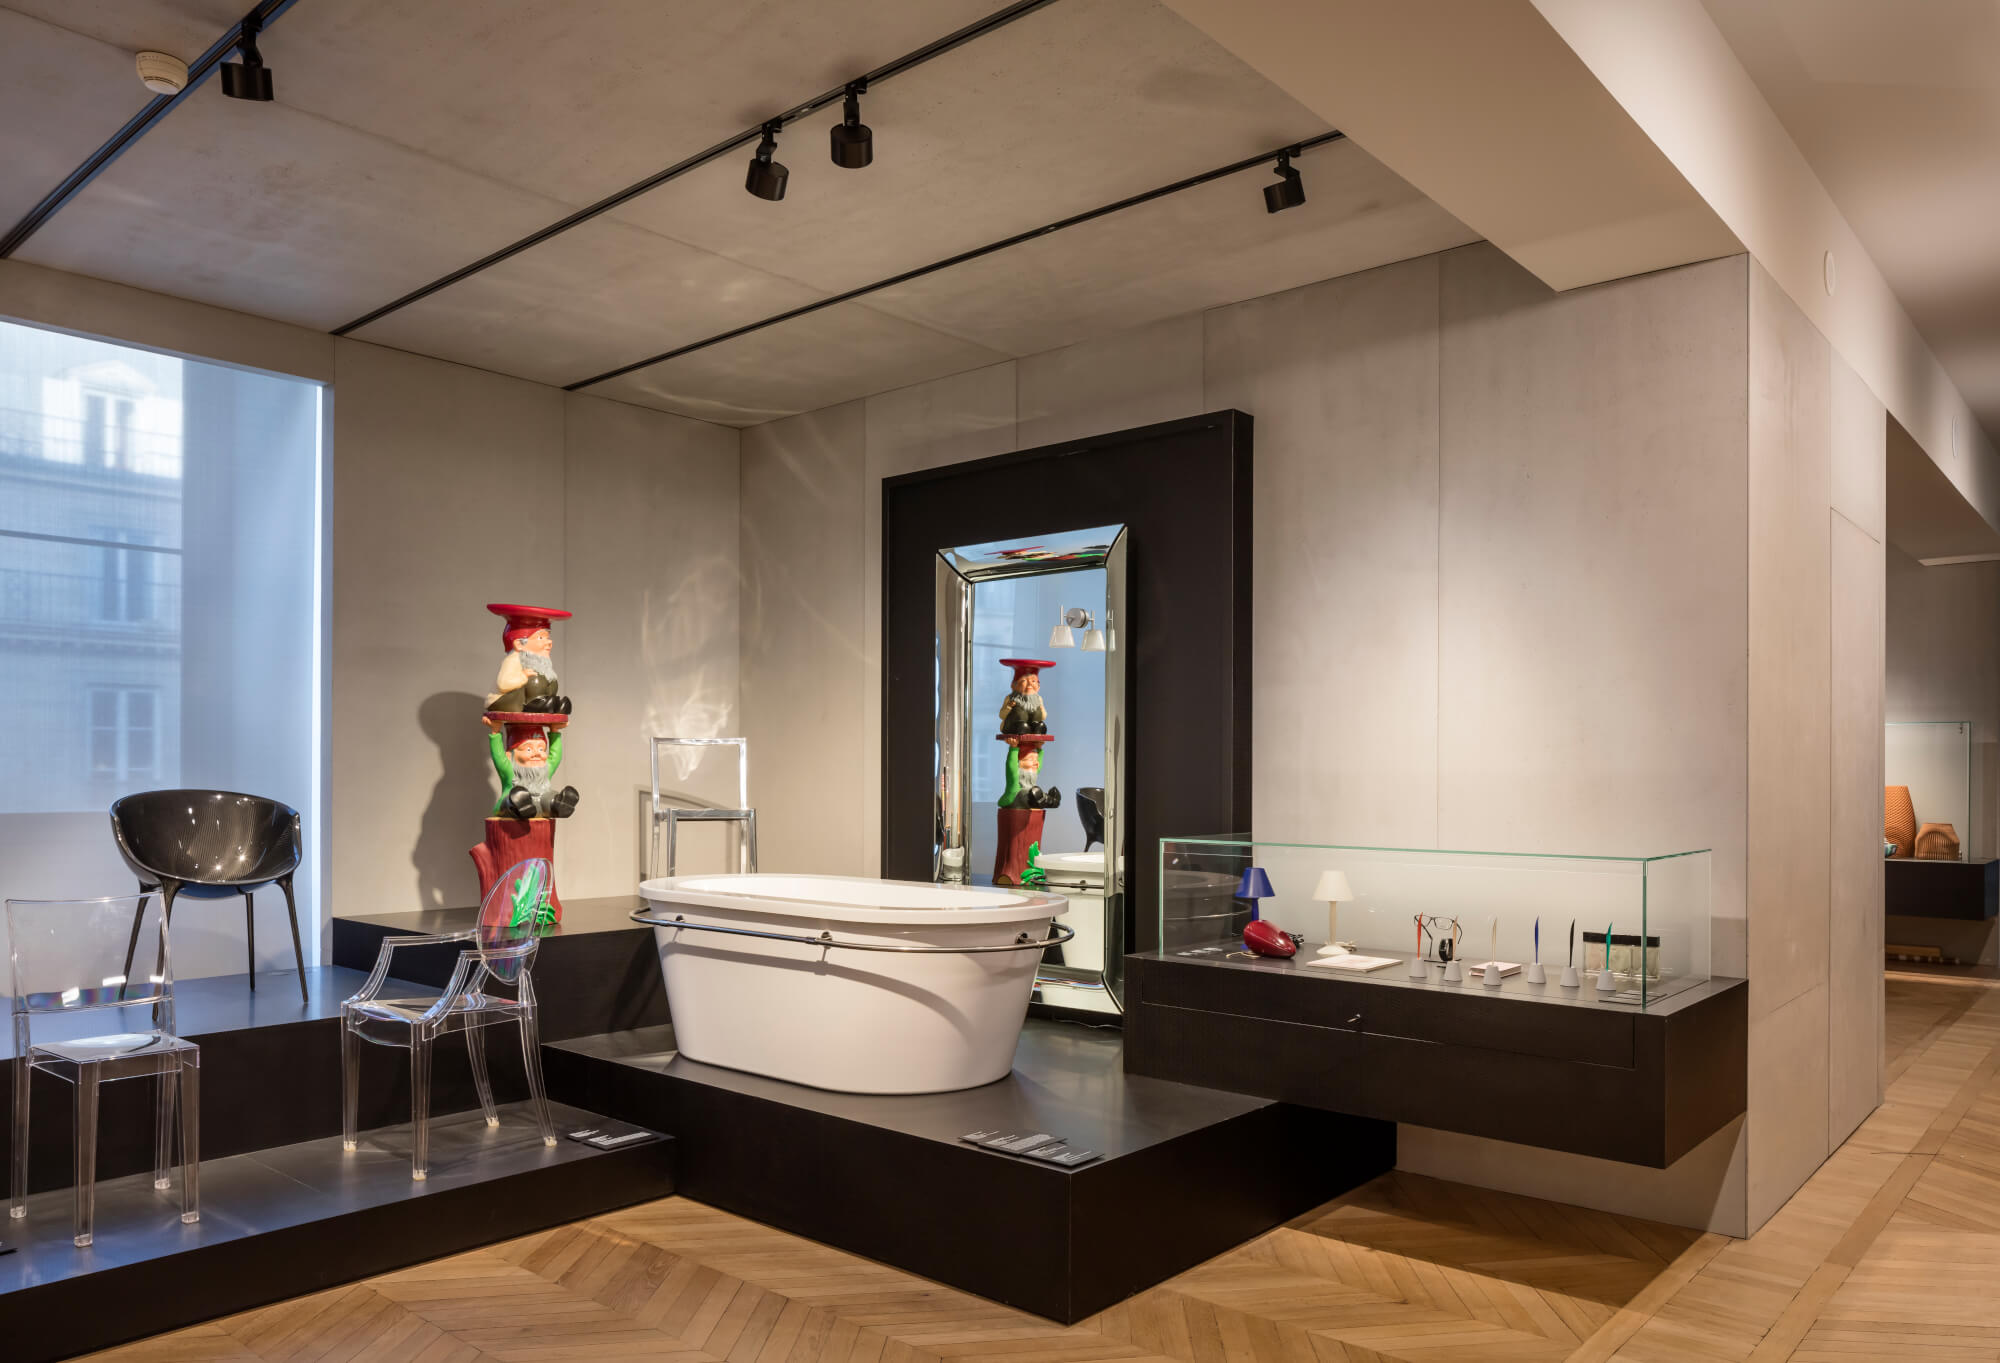 “PHILIPPE STARCK & DESIGN FOR EVERYONE” AT MAD 